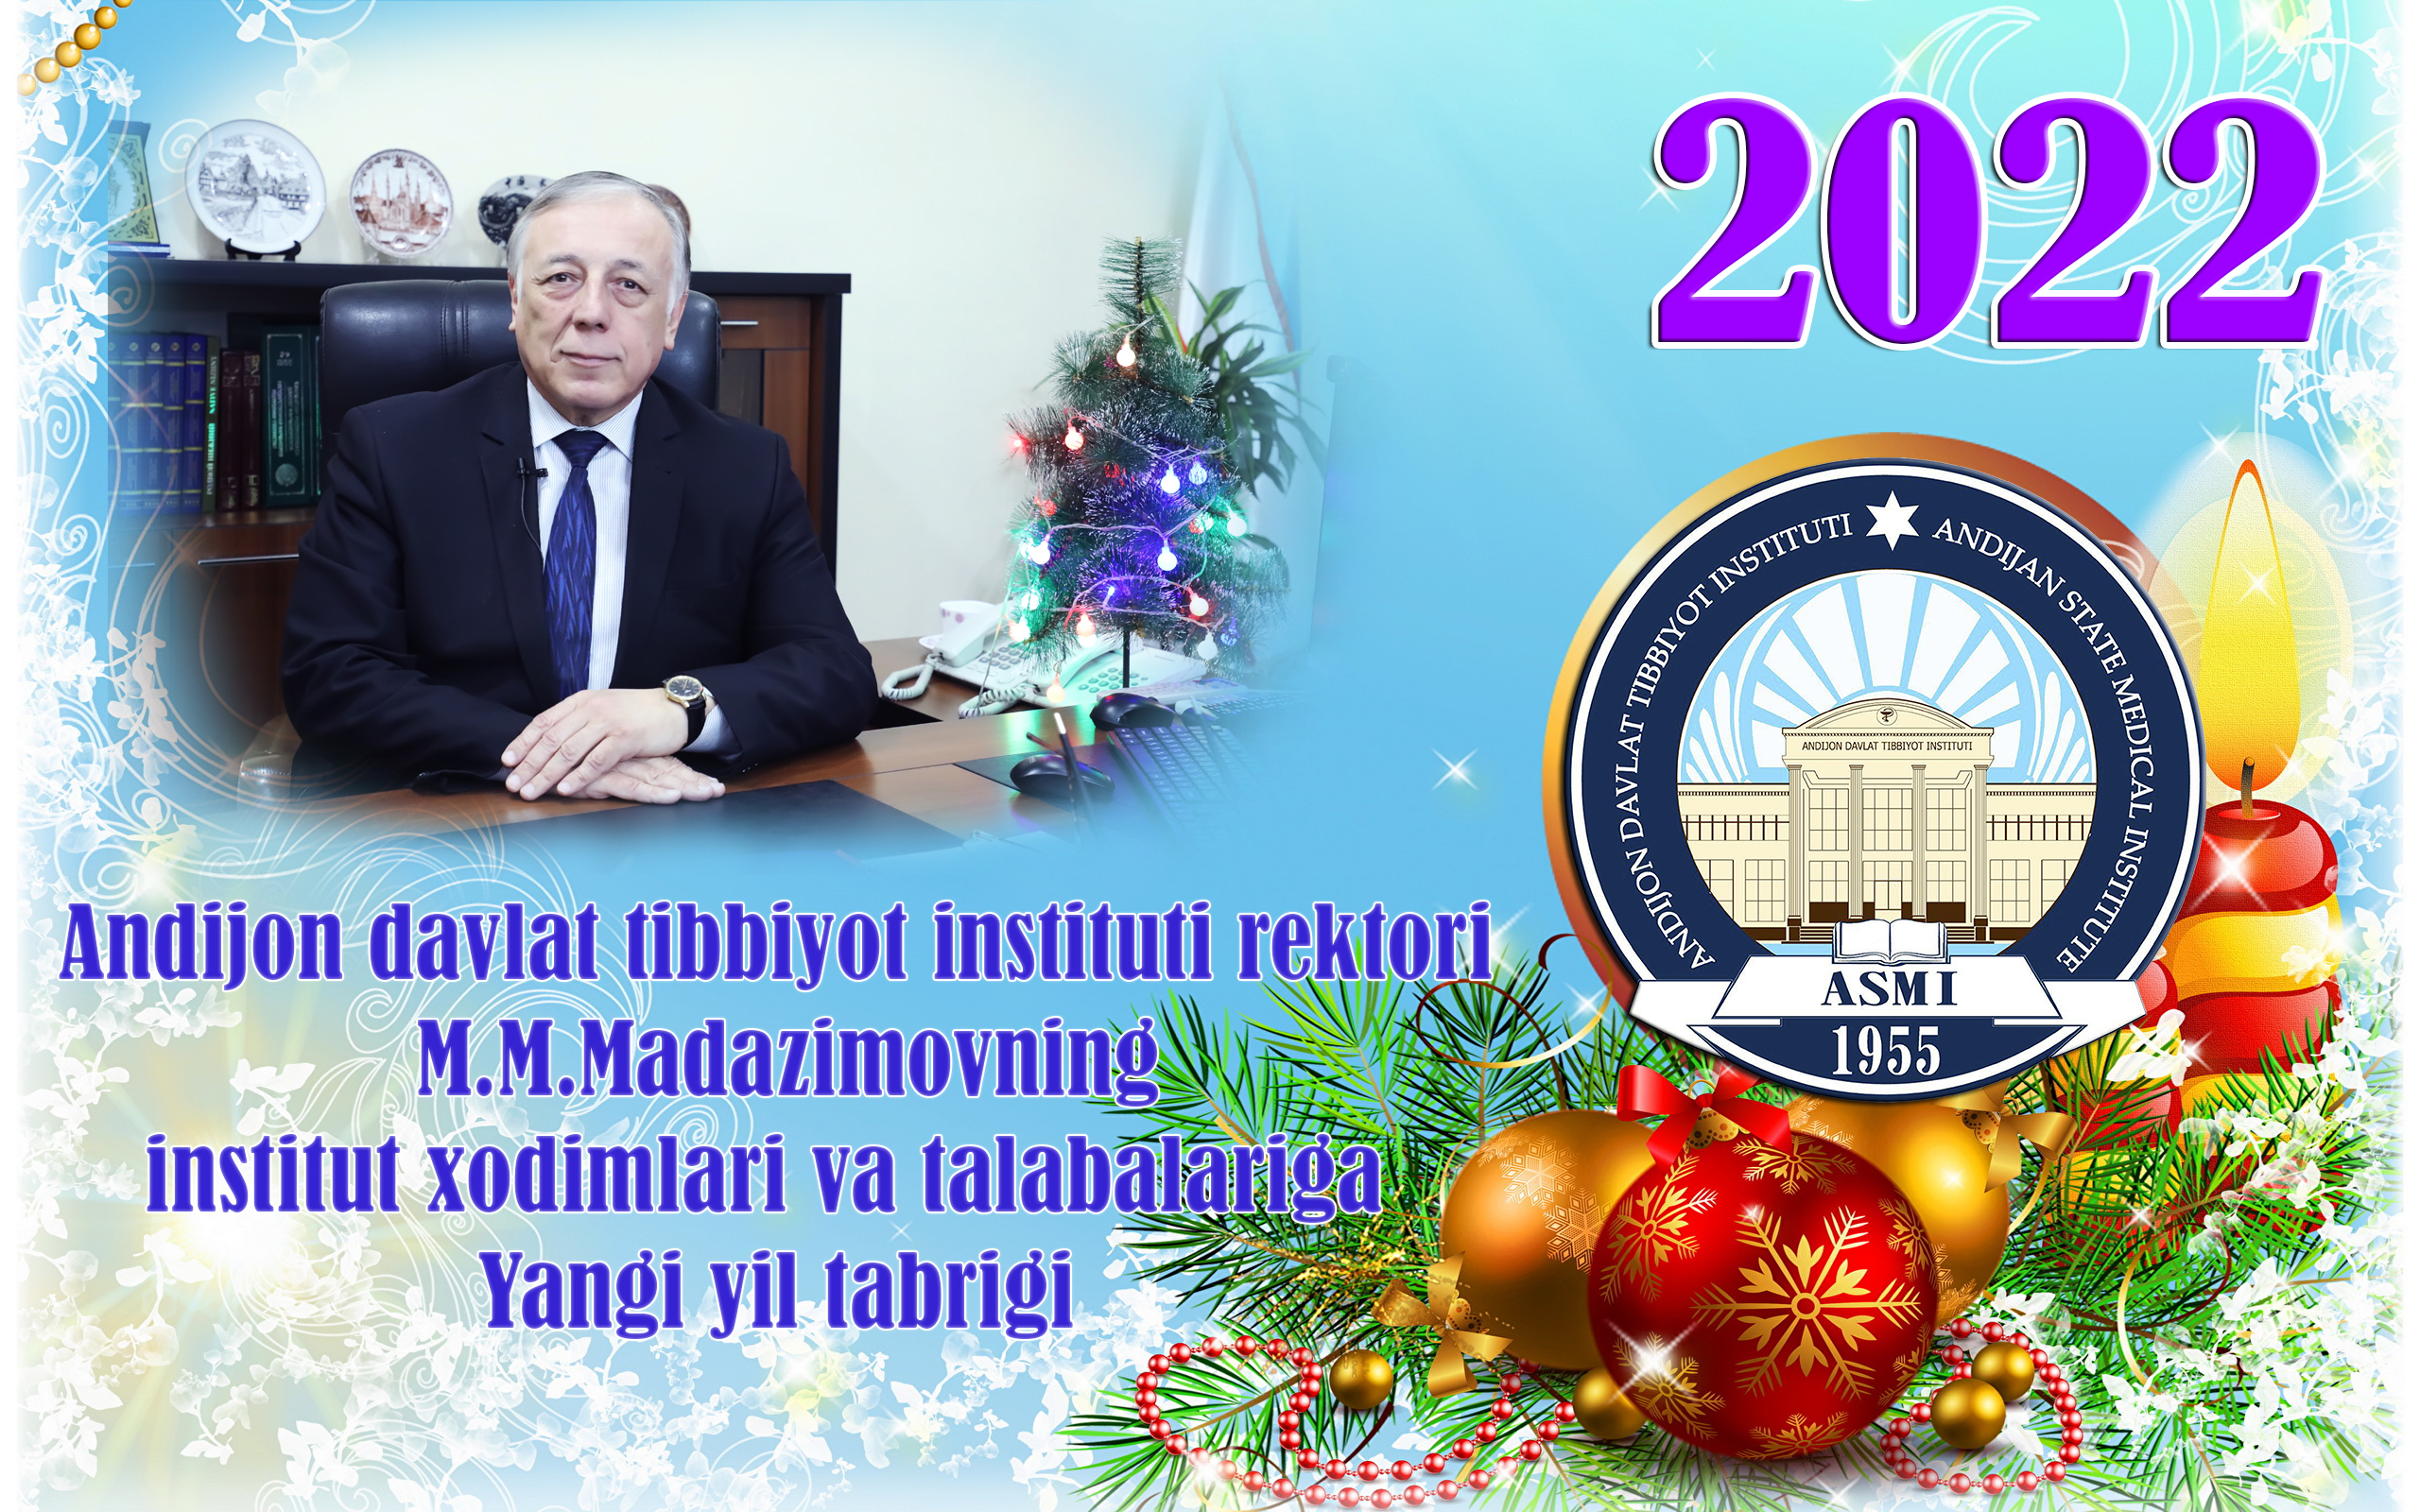 New Year greetings from the rector of Andijan State Medical Institute M. Madazimov to the staff and students of the institute